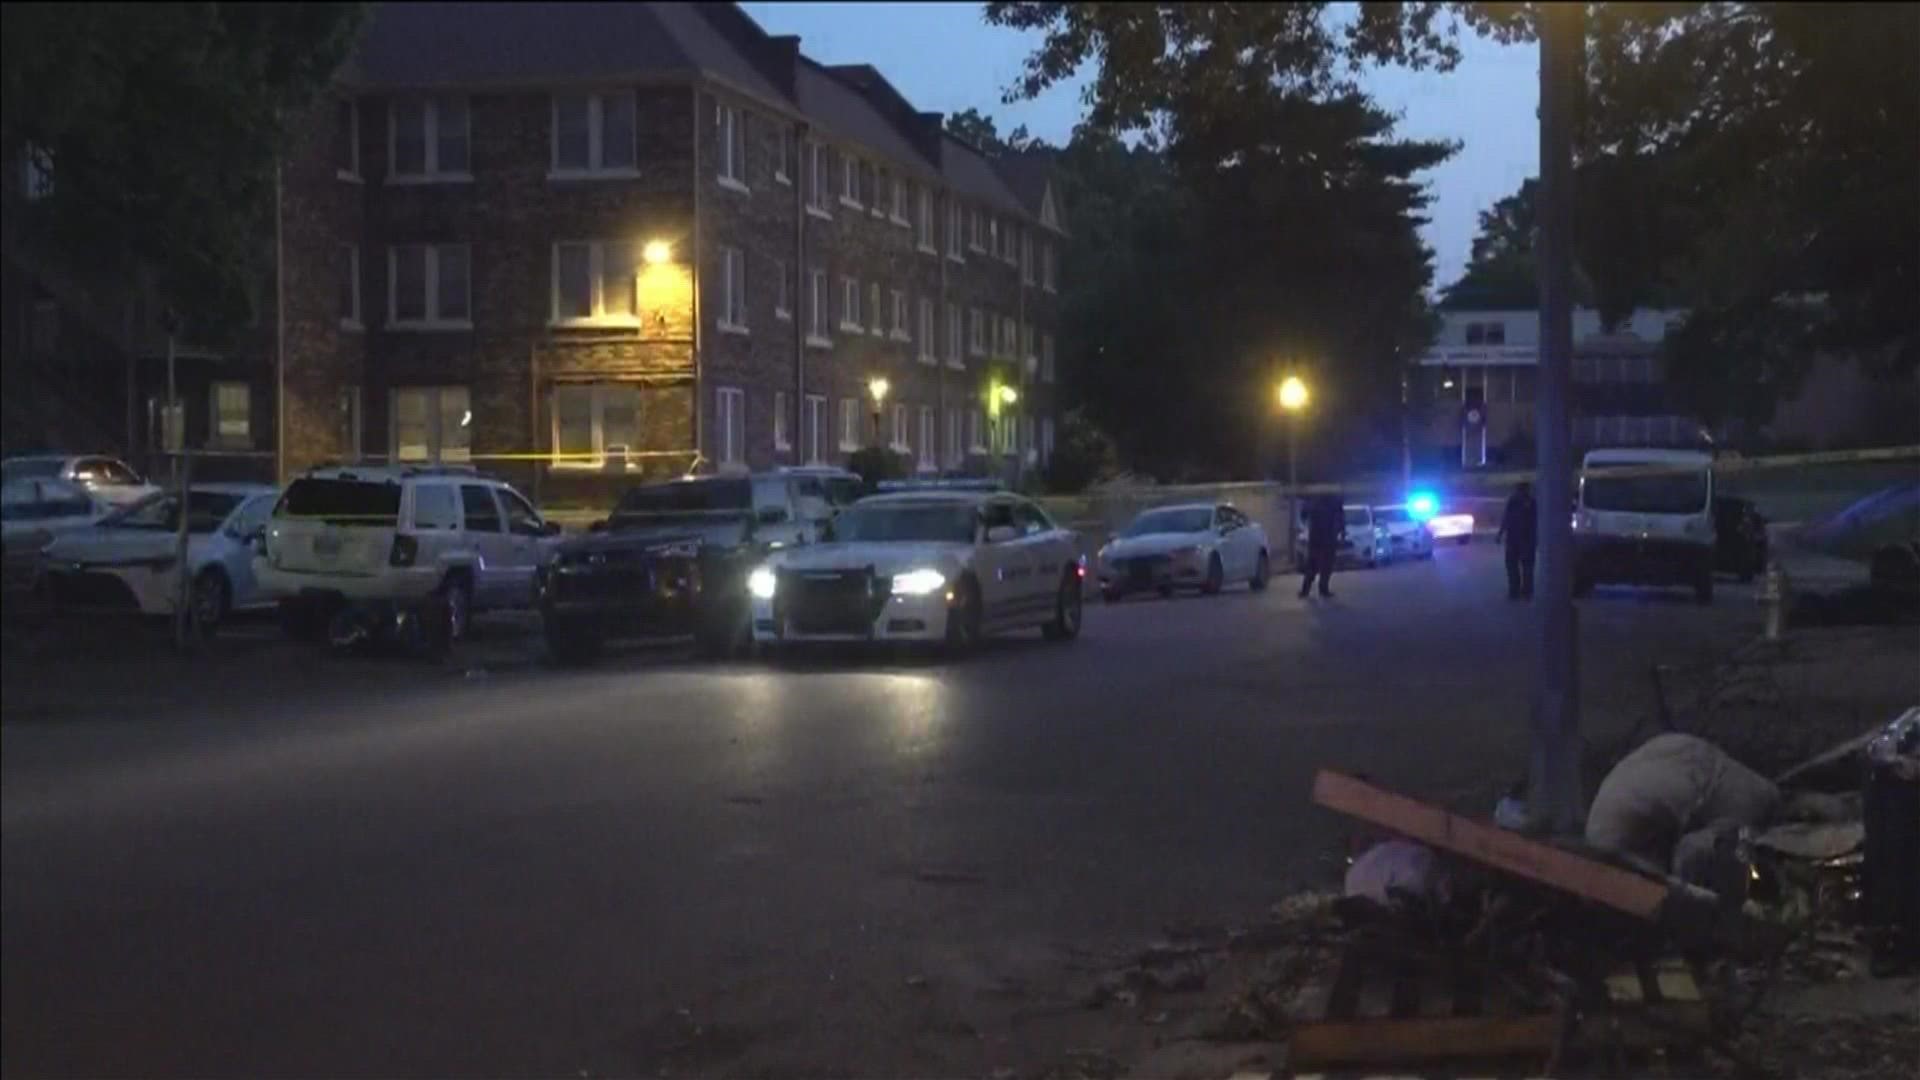 Memphis Police said the victim was dead when they arrived to the scene Thursday morning.